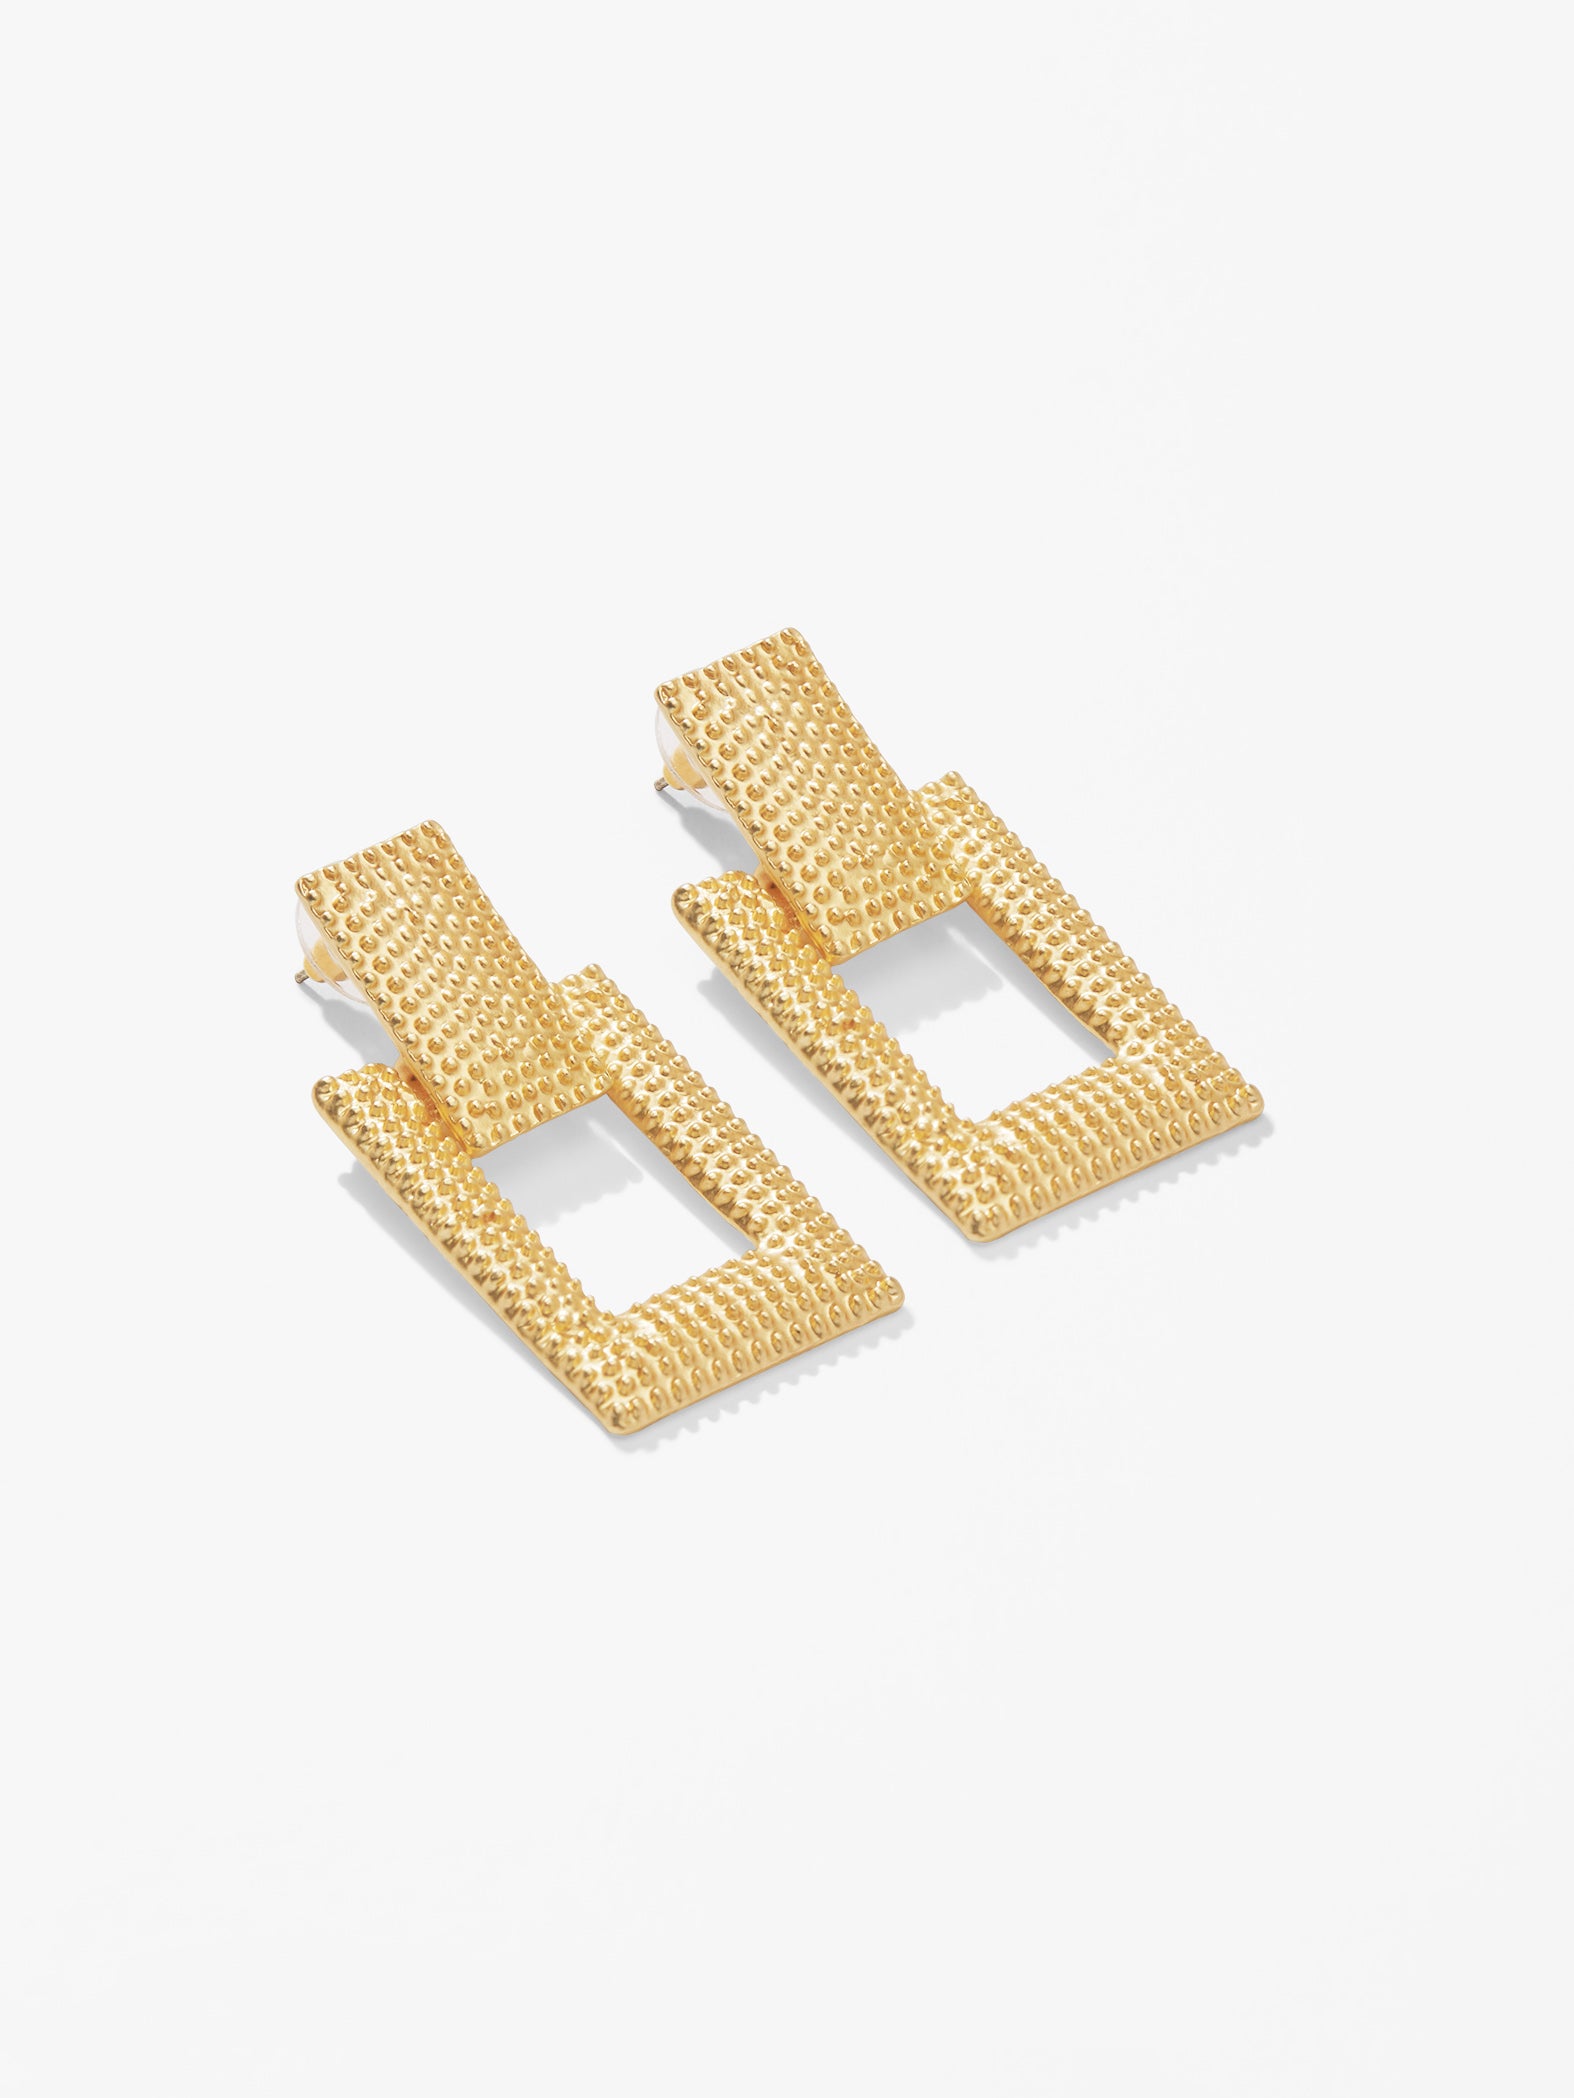 Gold Textured Rectangle Earrings